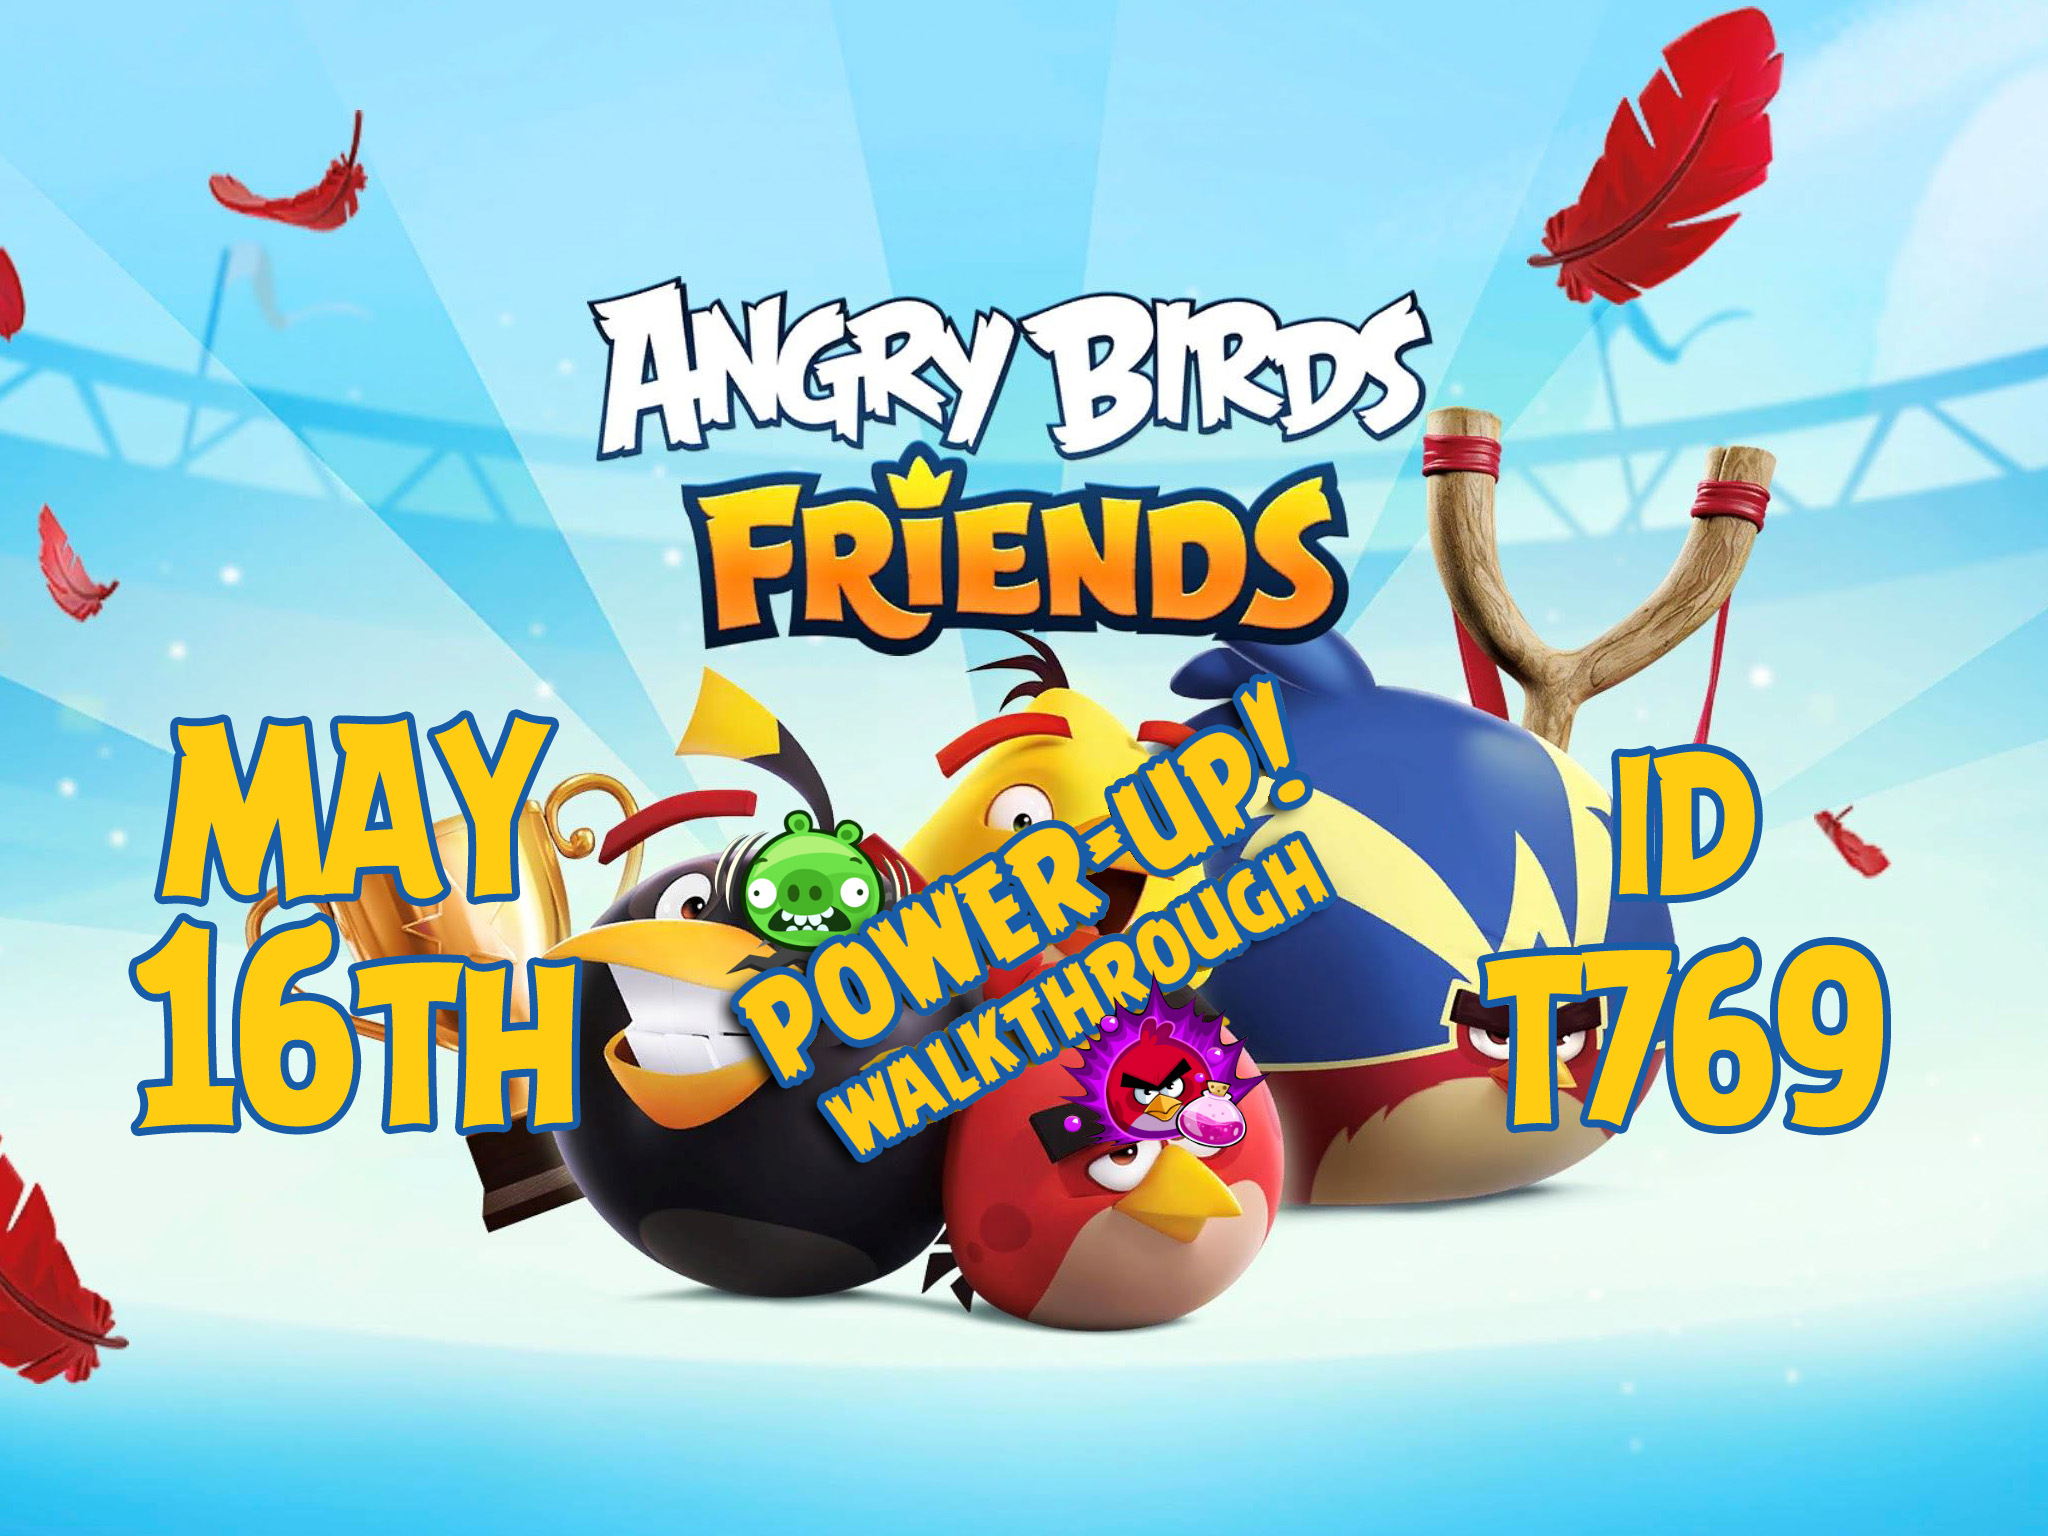 Angry-Birds-Friends-Tournament-T769-Feature-Image-PU